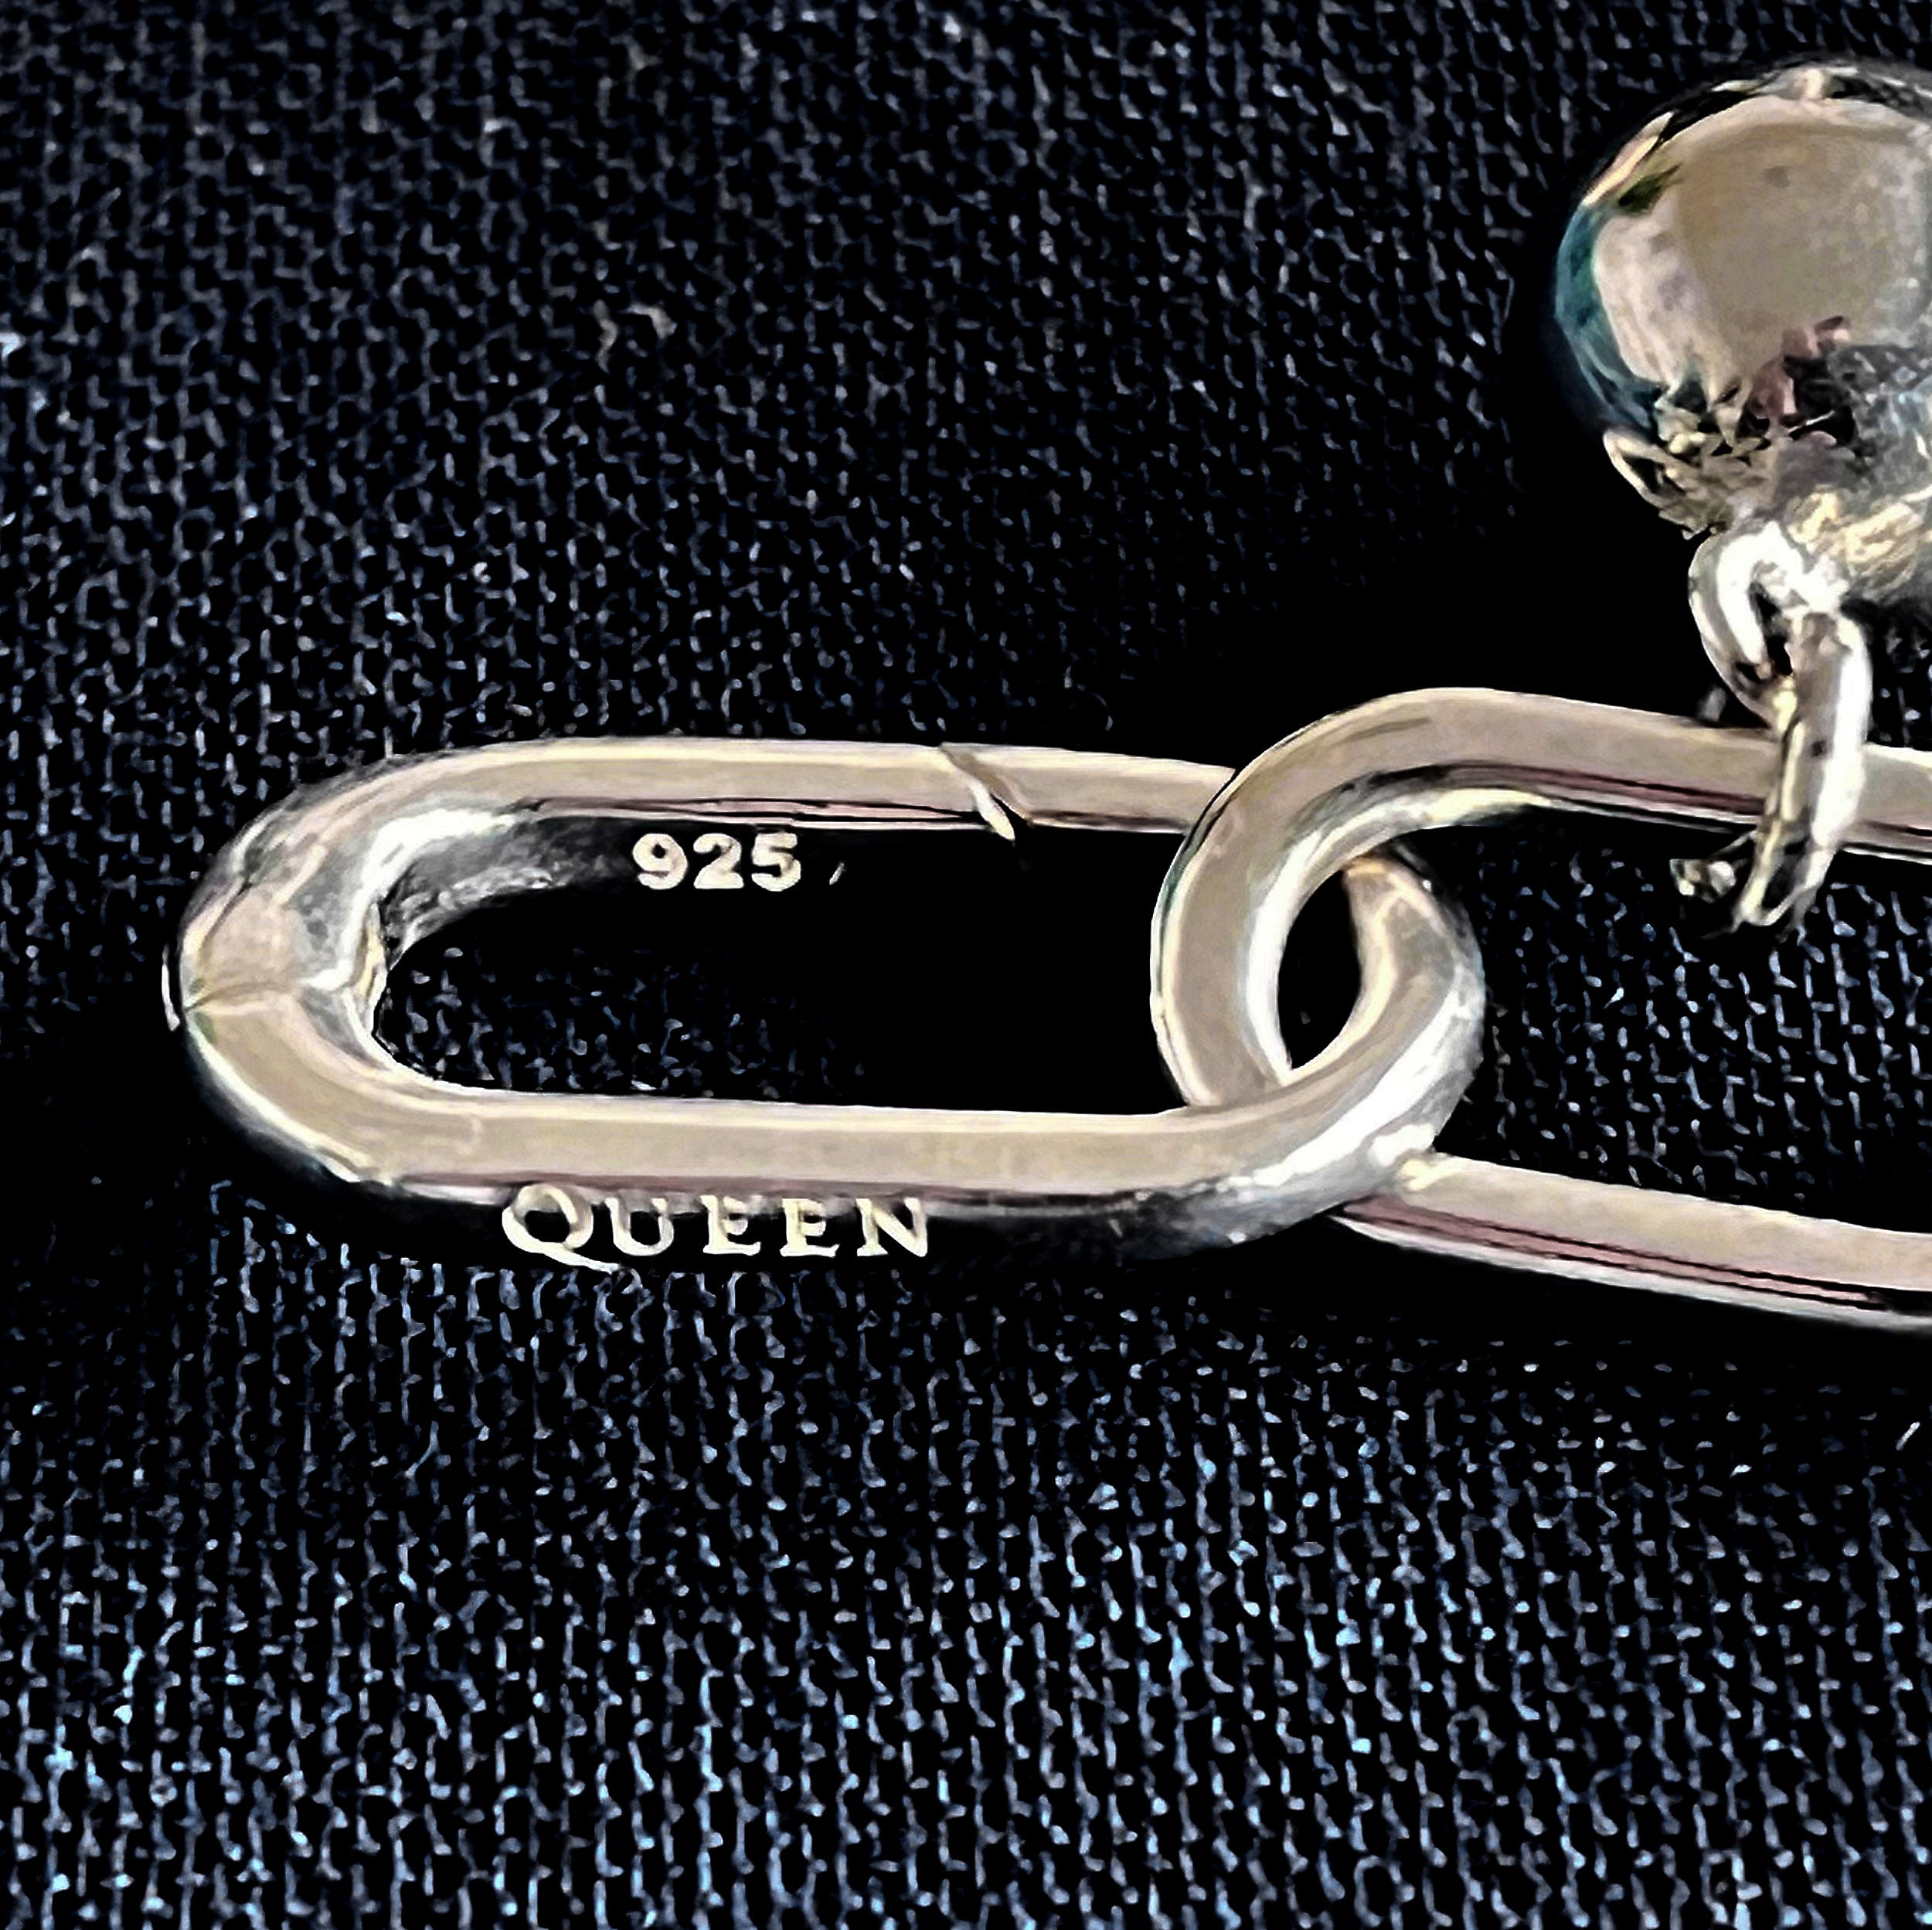 Queen - The Official Queen Silver Charm Bracelet and First 3 Charms.